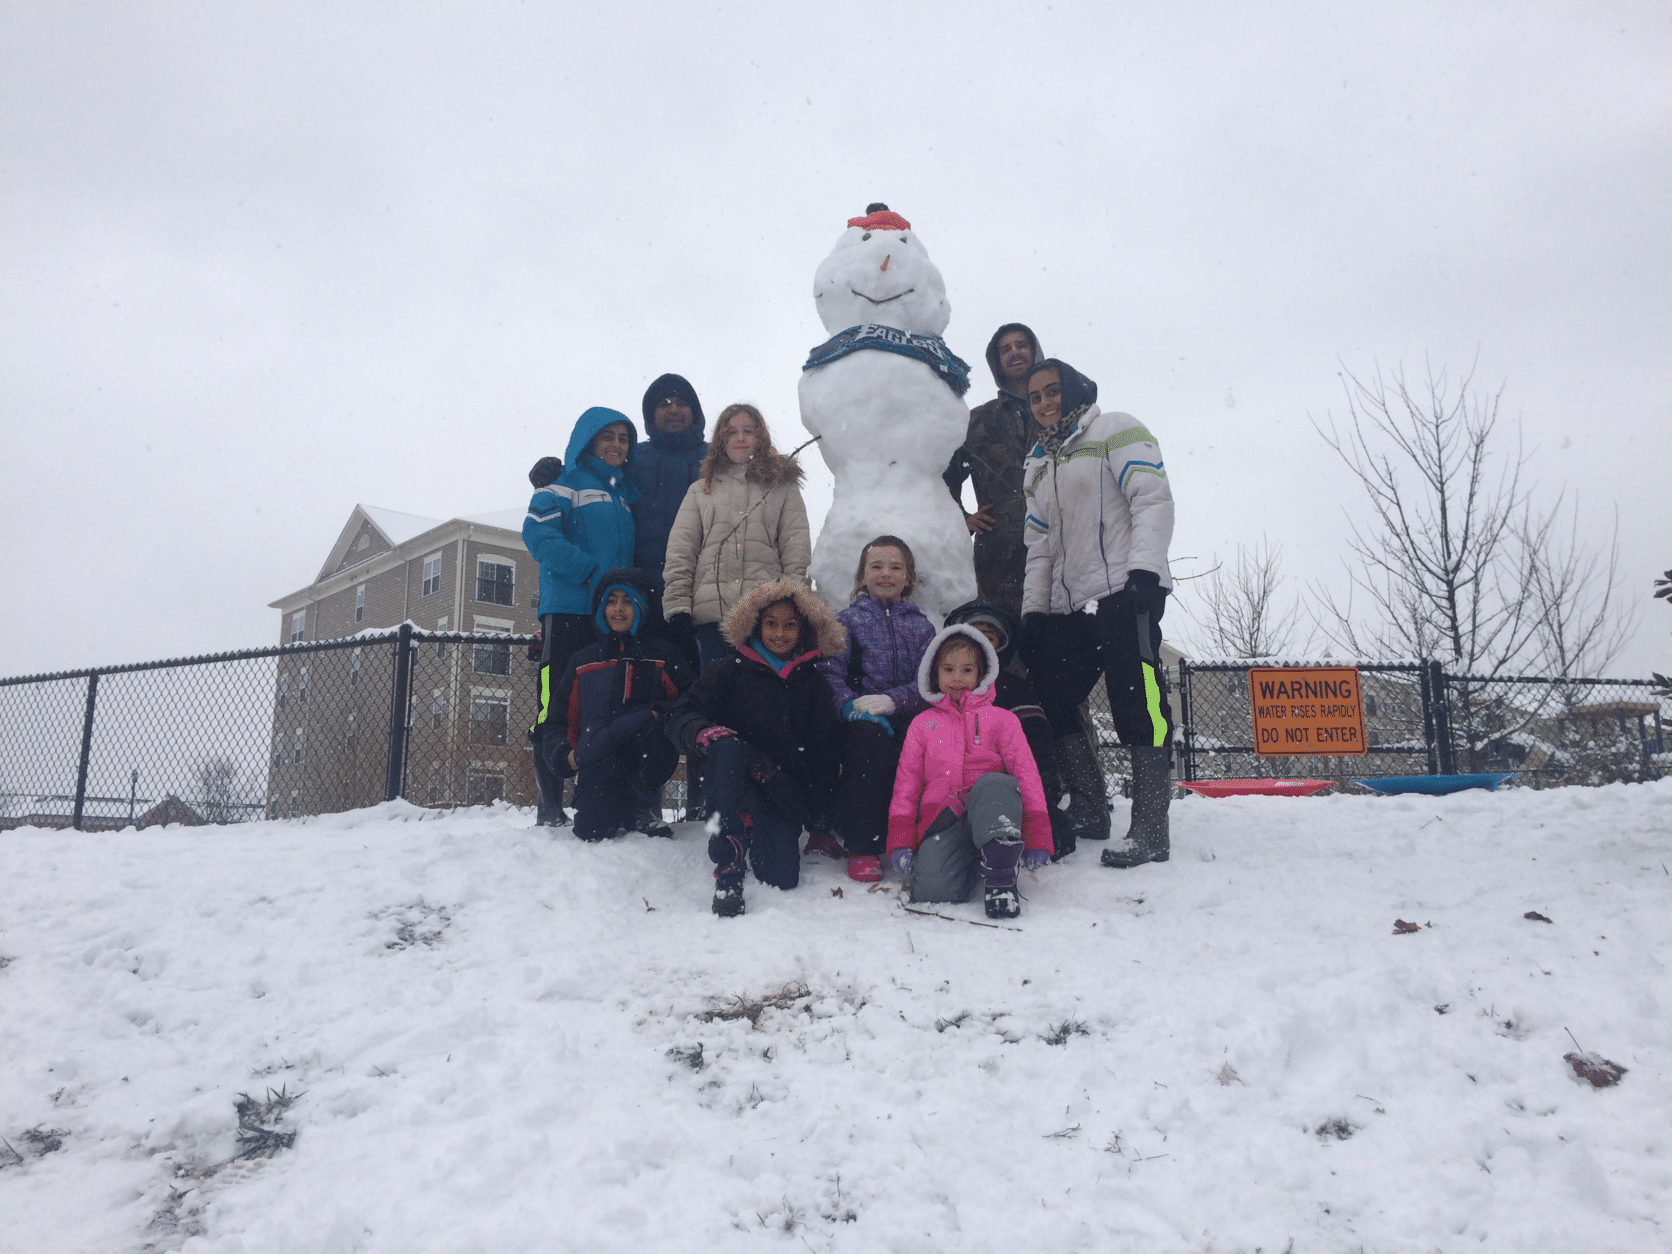 This WTOP listener said they helped make the "biggest snowman in the neighborhood" in Woodbridge, Virginia. There was also a lot of sledding involved. (Courtesy Kamaljit Chawla)